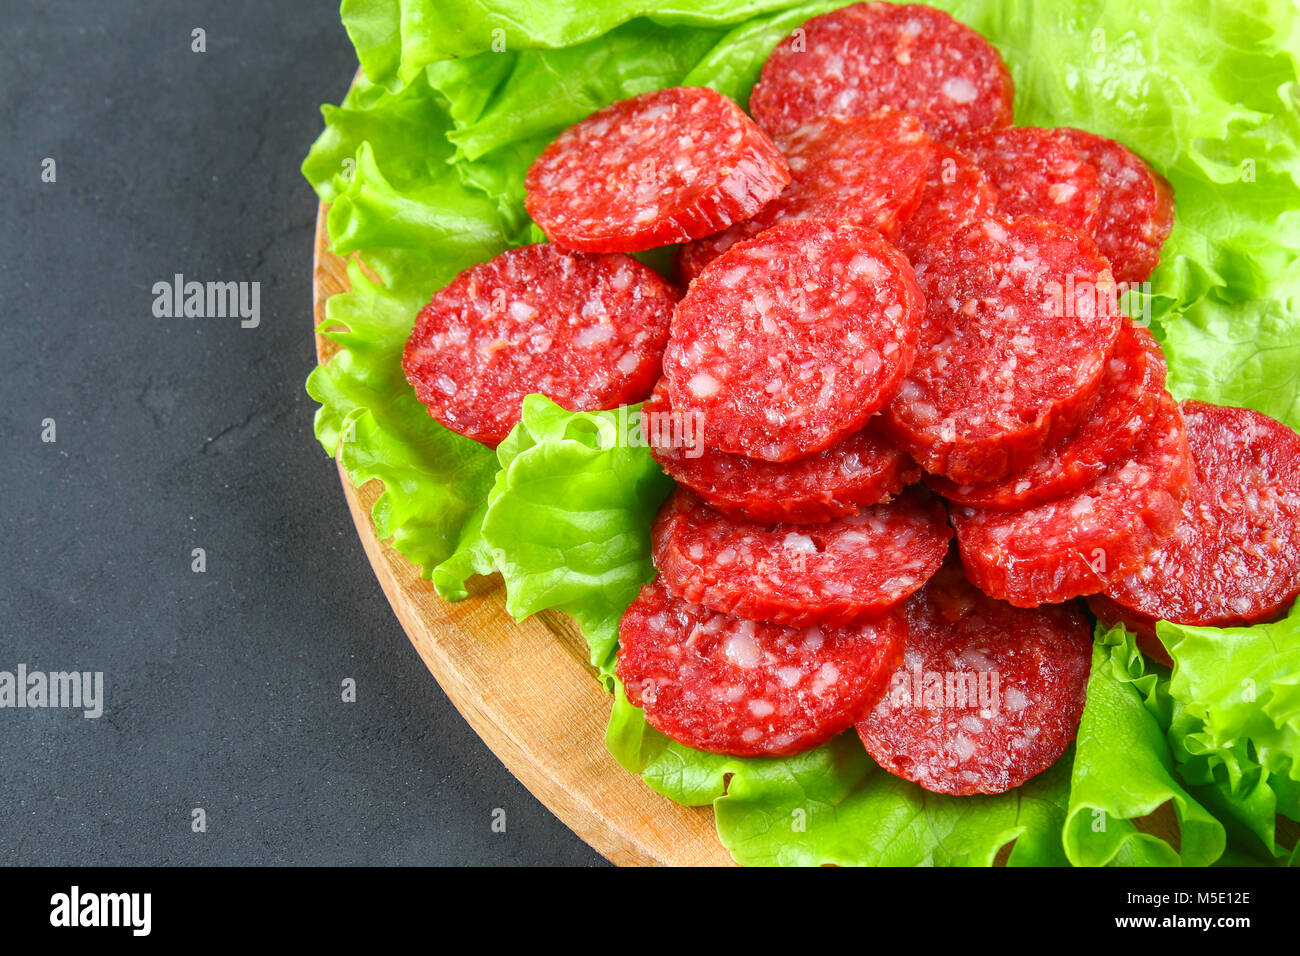 Smoked sausage, salami chopped in slices on a salad on a wooden circular cutting board on a concrete gray table Stock Photo